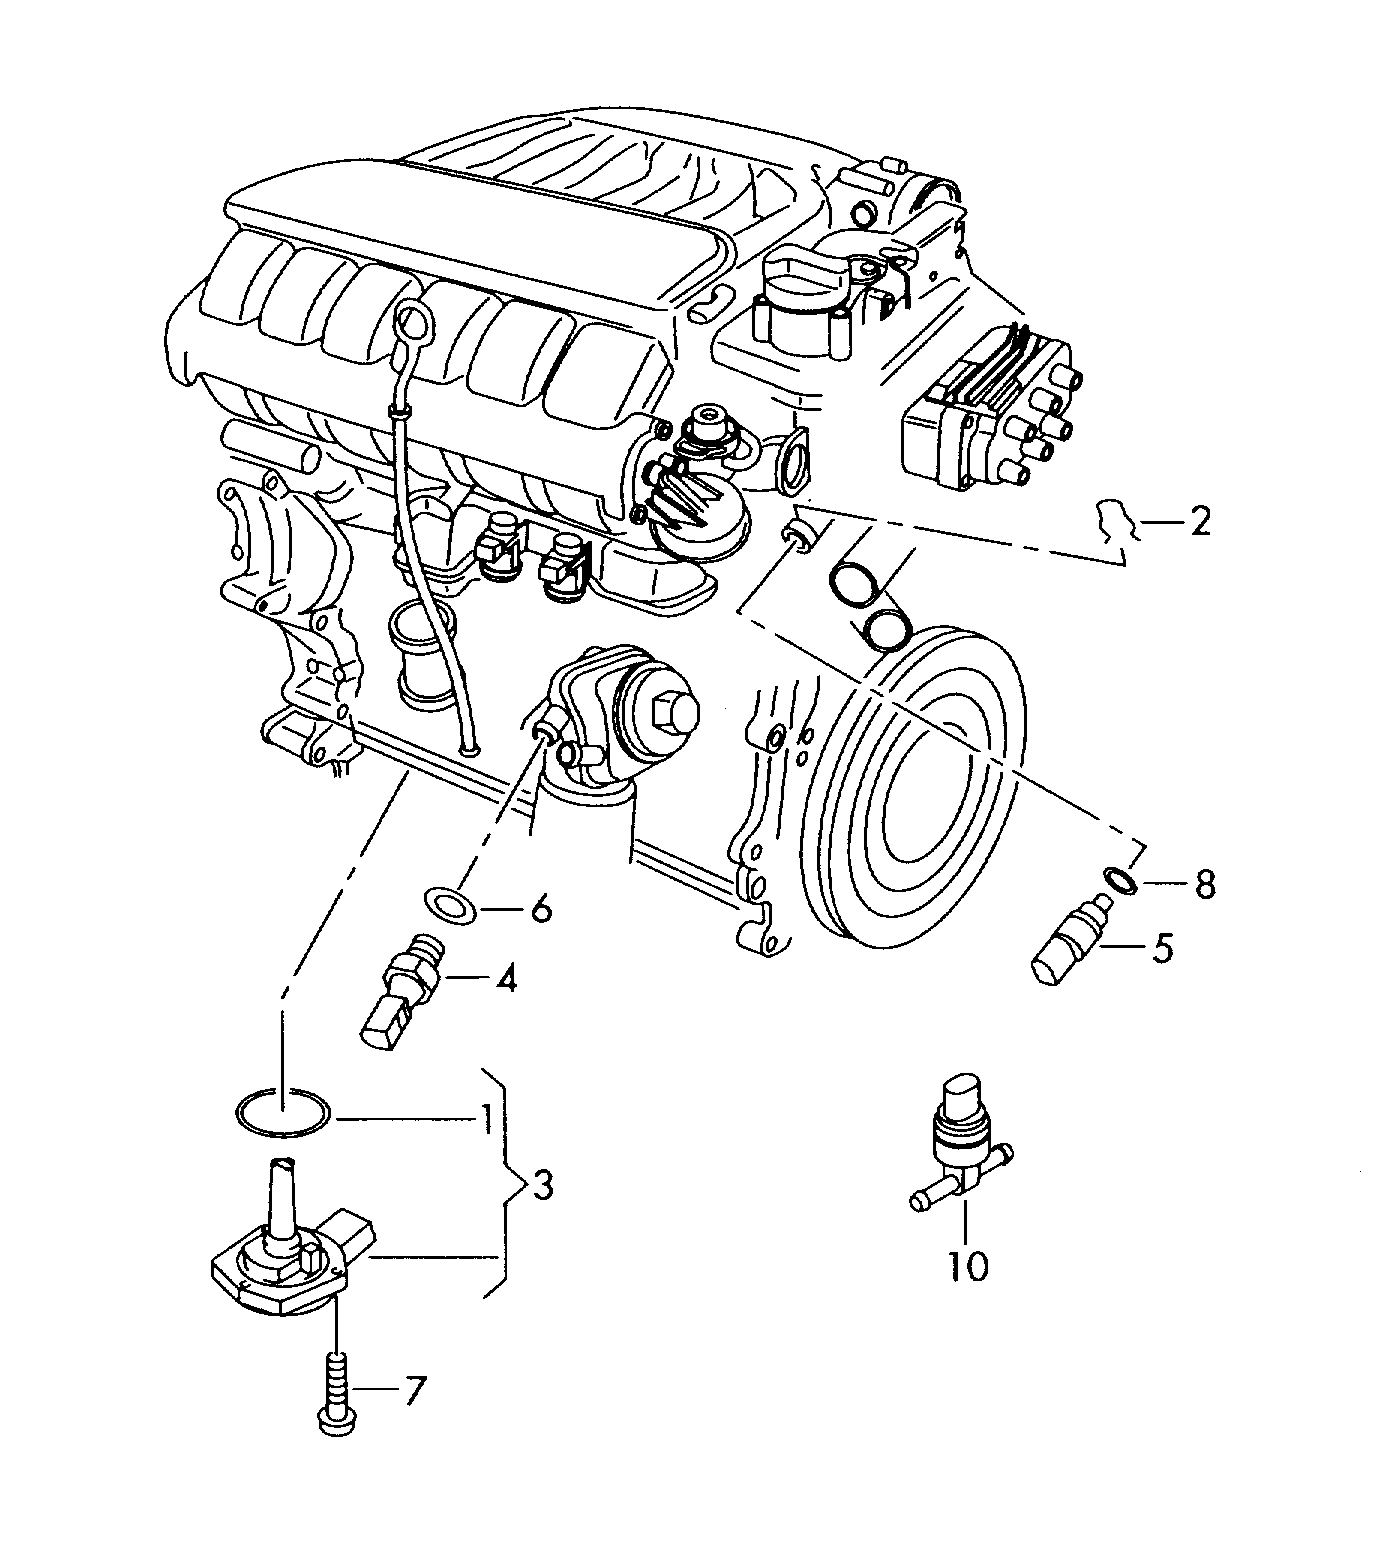 VW 070 919 501 D - Switches and senders on engine: 1 pcs. www.parts5.com